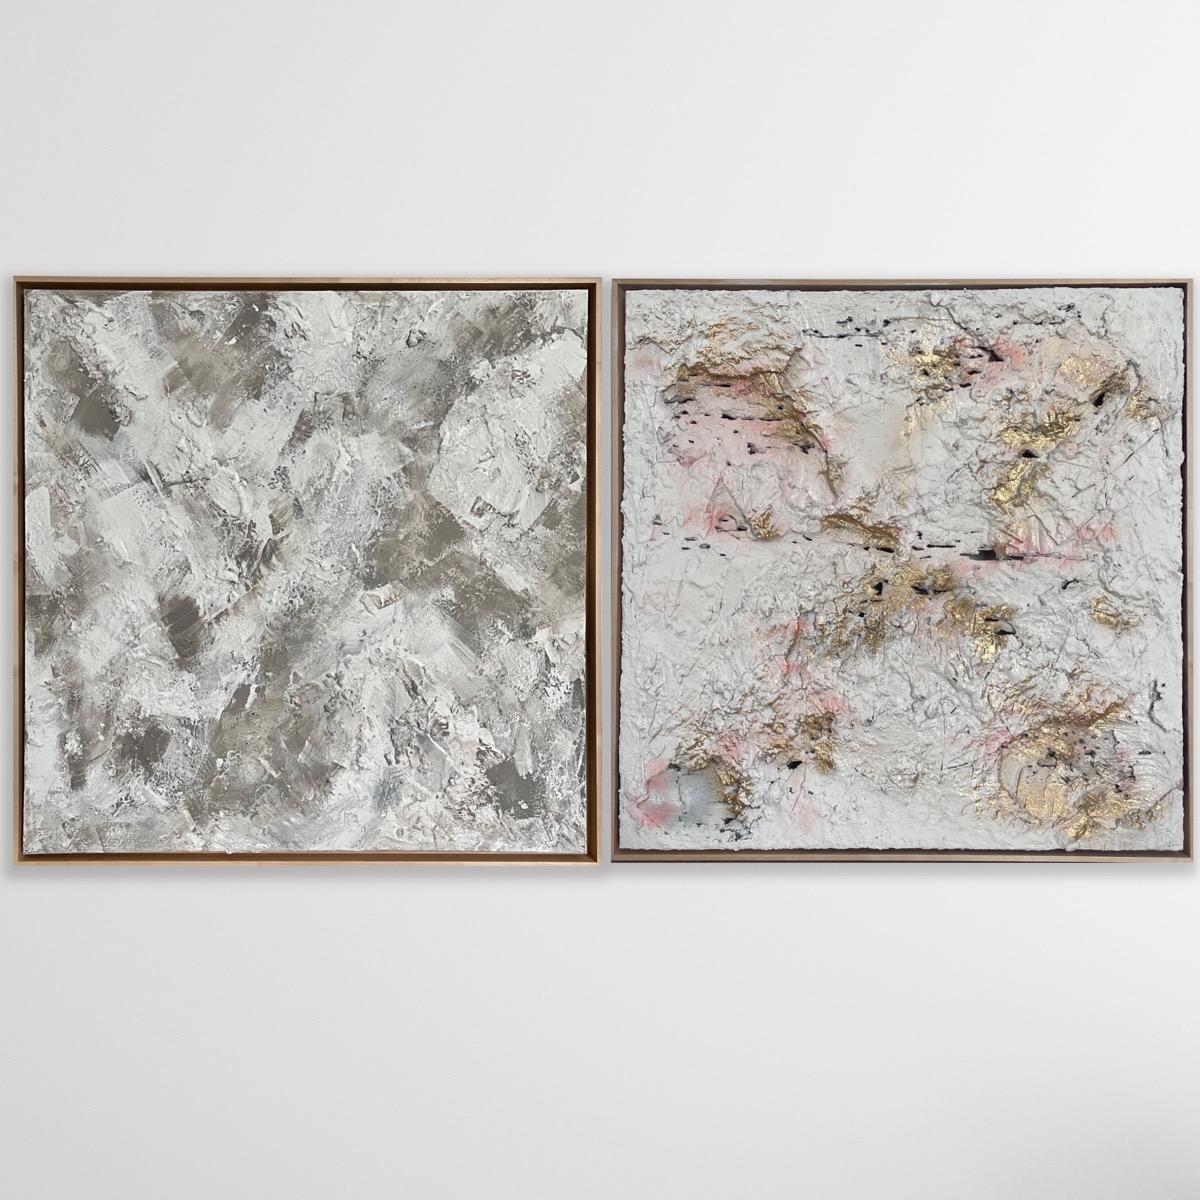 Rajan Seth Landscape Painting - Diptych of Taupe and Concrete Rose, Original painting, Abstract, Textured art